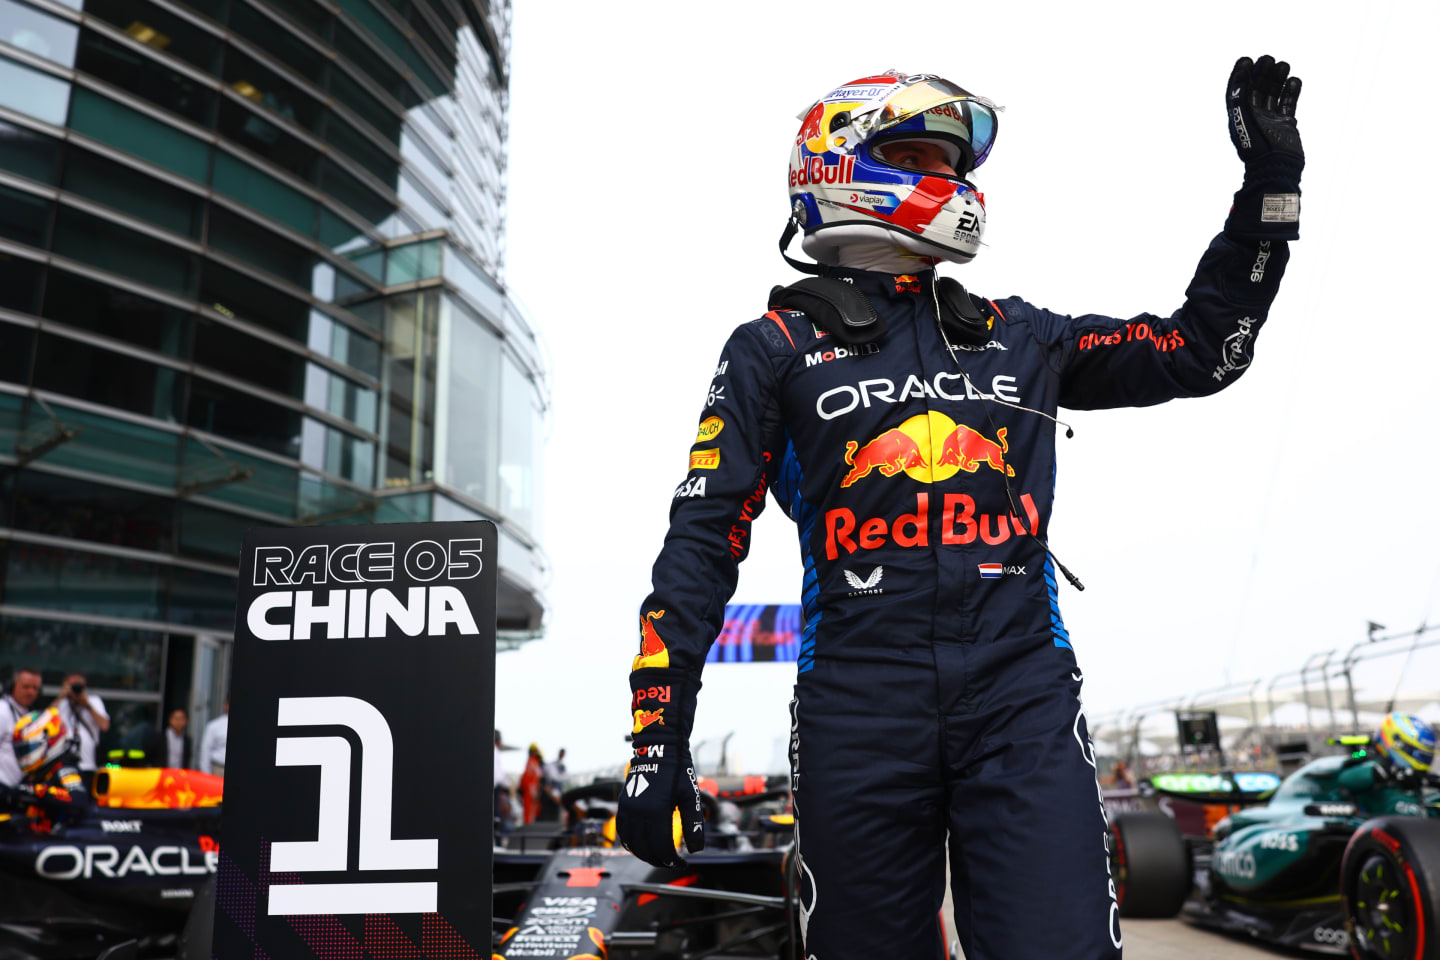 SHANGHAI, CHINA - APRIL 20: Pole position qualifier Max Verstappen of the Netherlands and Oracle